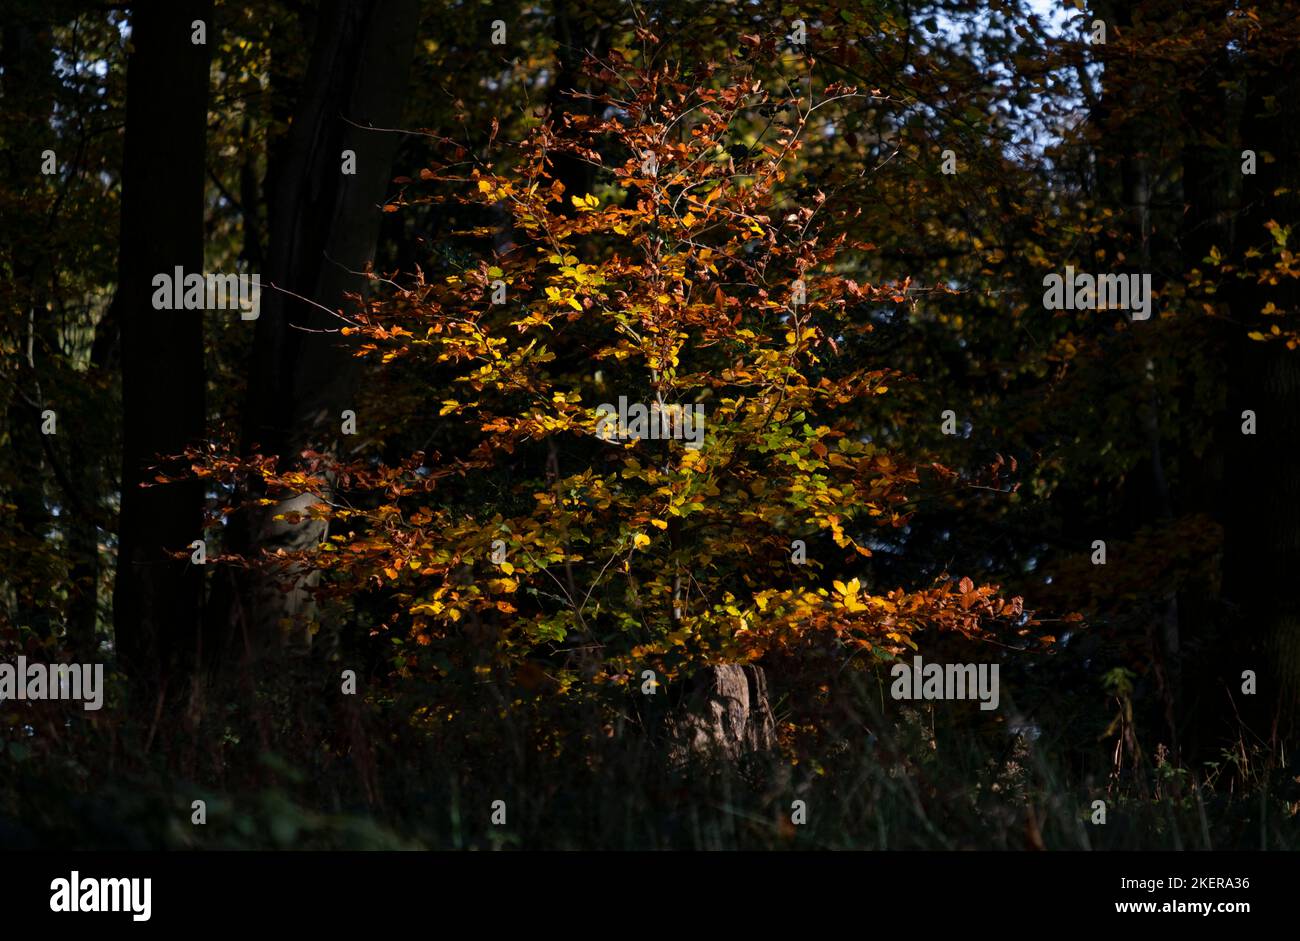 Vibrant autumn coloured leaves in a dark wood, Worcestershire, England. Stock Photo